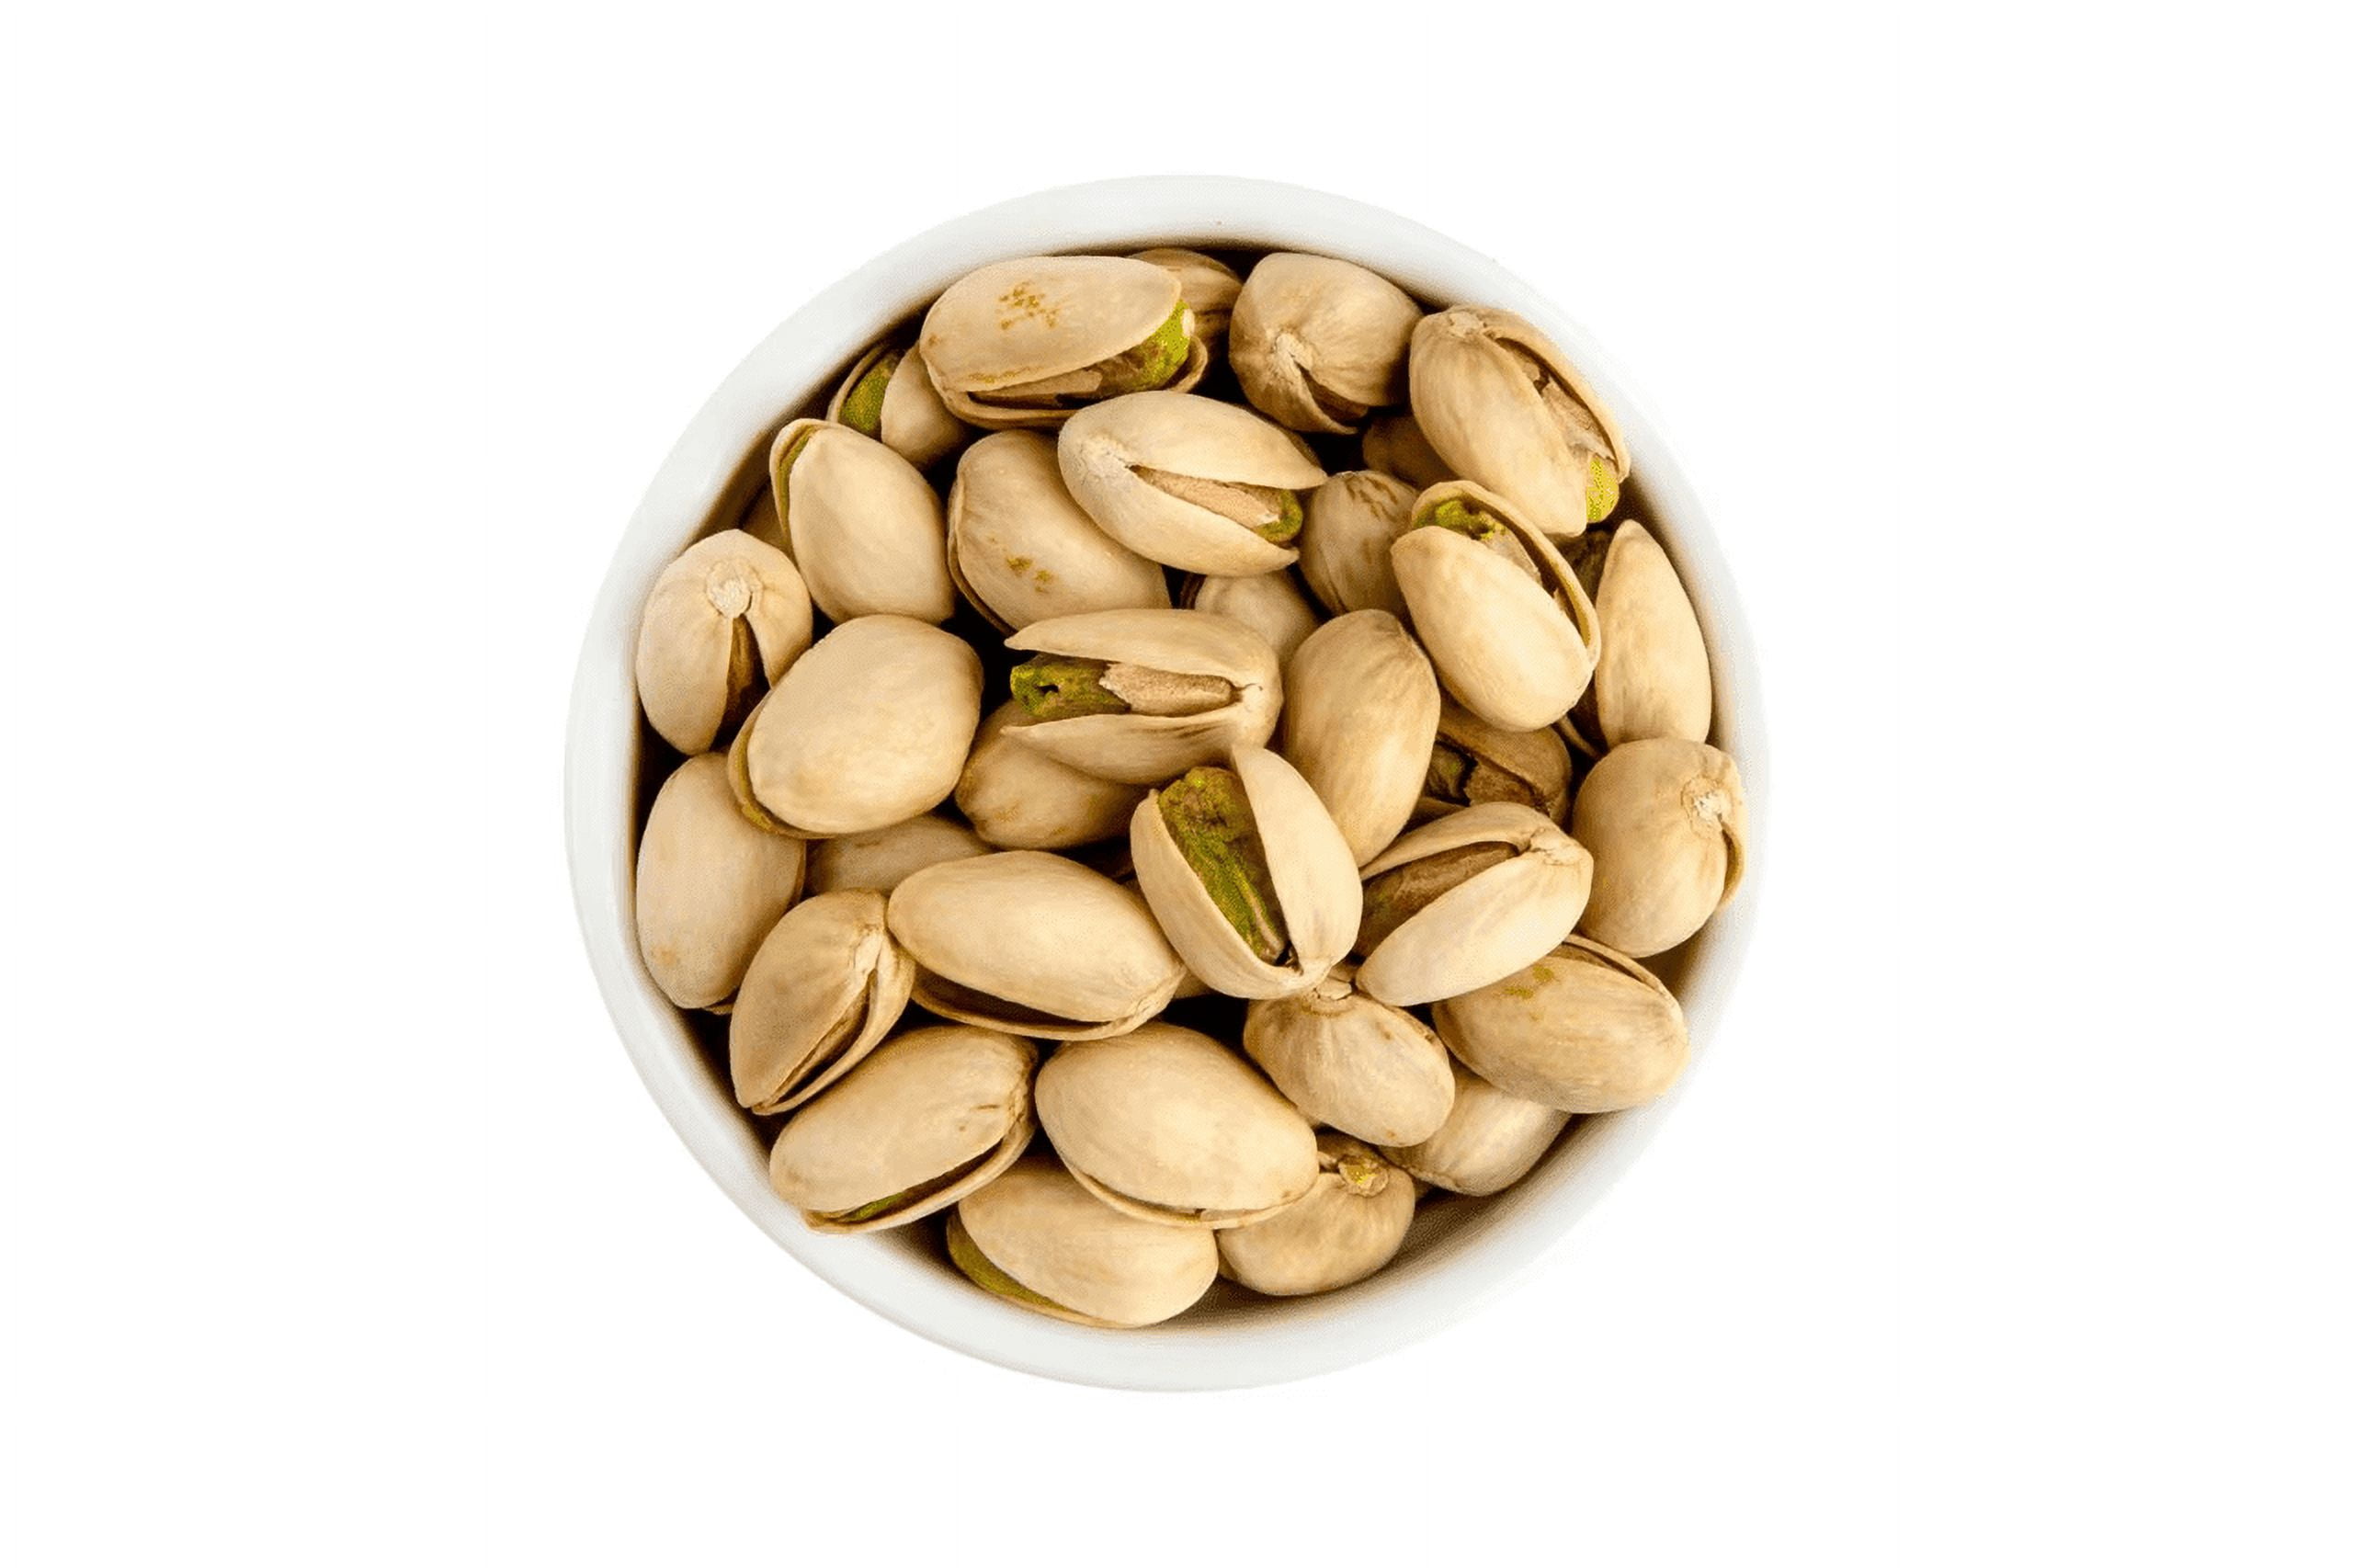 Pistachios - Whole Raw No Shell • Same-Day Shipping